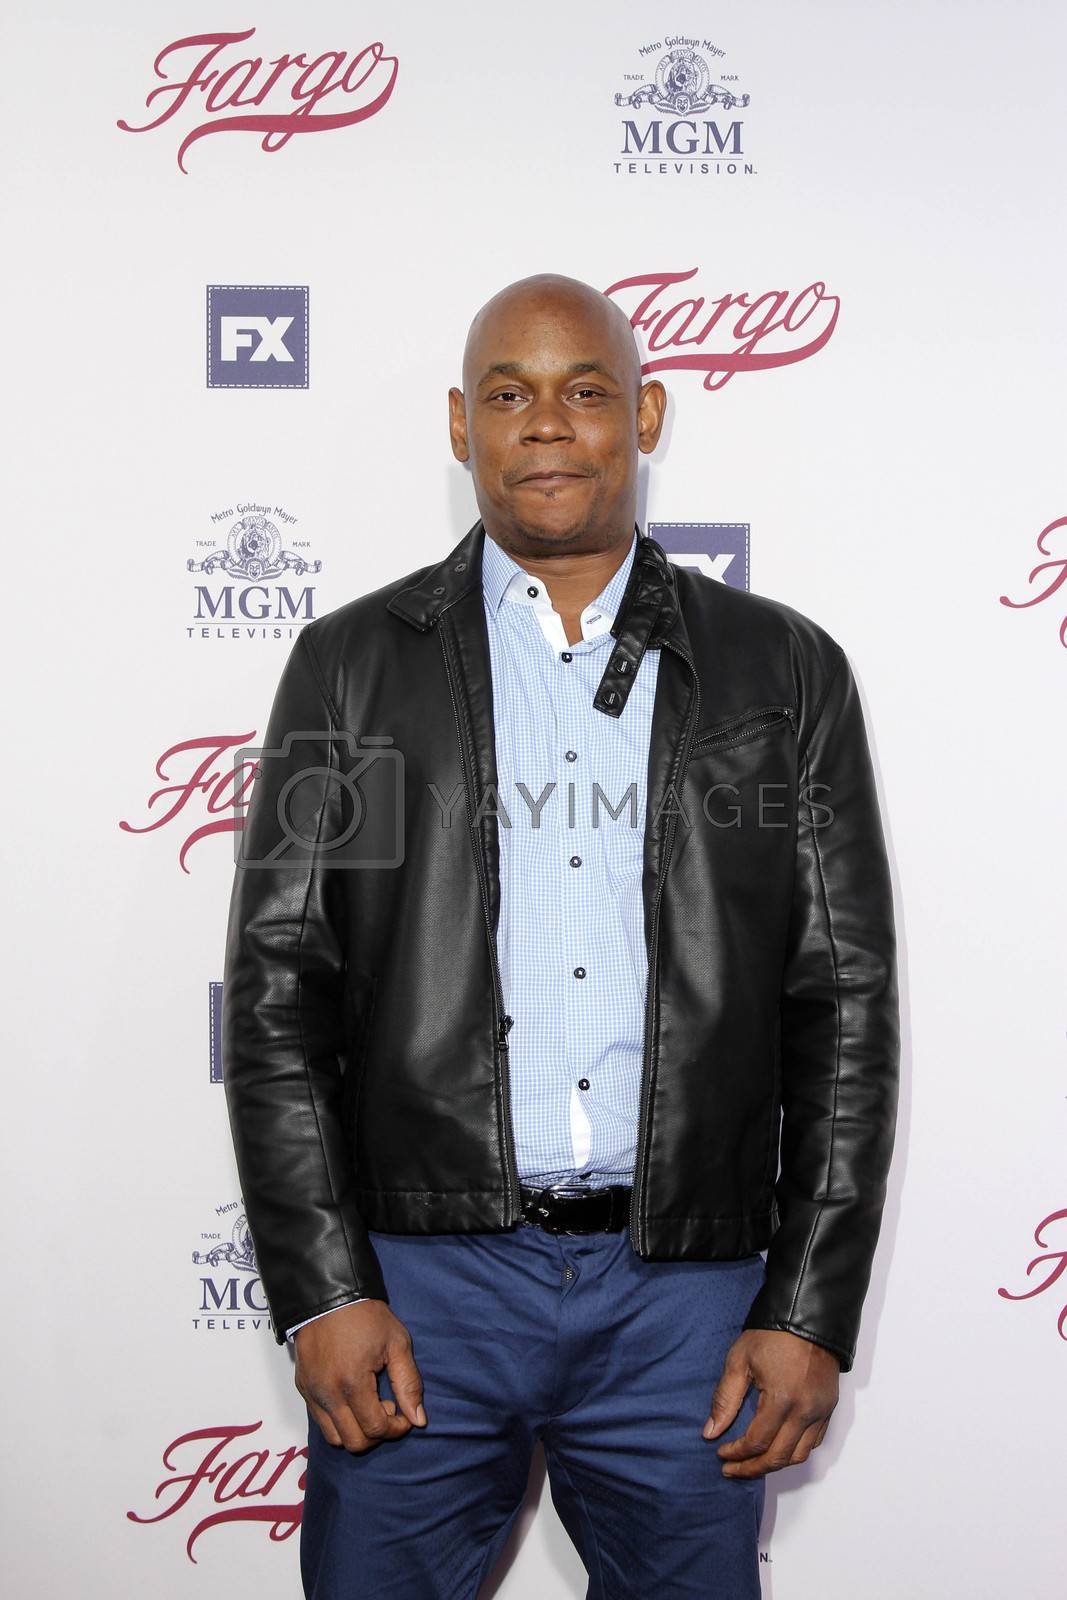 Royalty free image of Bokeem Woodbine
at the "Fargo" For Your Consideration Red Carpet Event, Paramount Pictures Studios , Los Angeles, CA 04-28-16/ImageCollect by ImageCollect